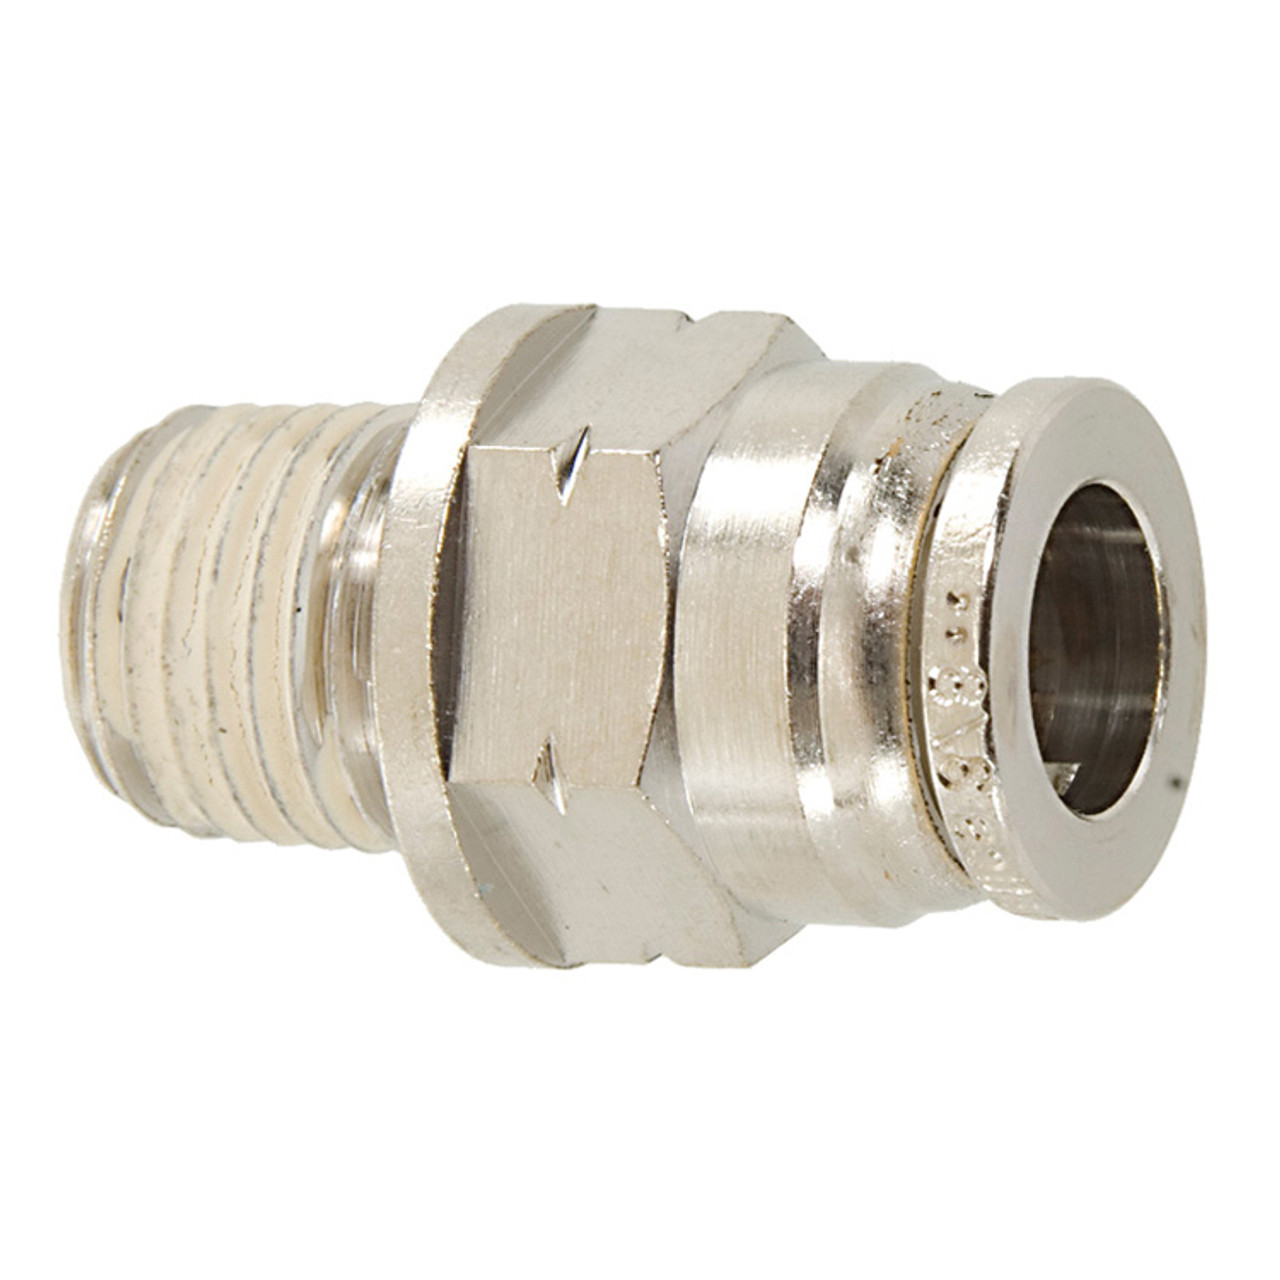 3/8 x 3/8" Nickel Plated Brass Male NPT - Push-To-Connect Connector   G6016P-06-06